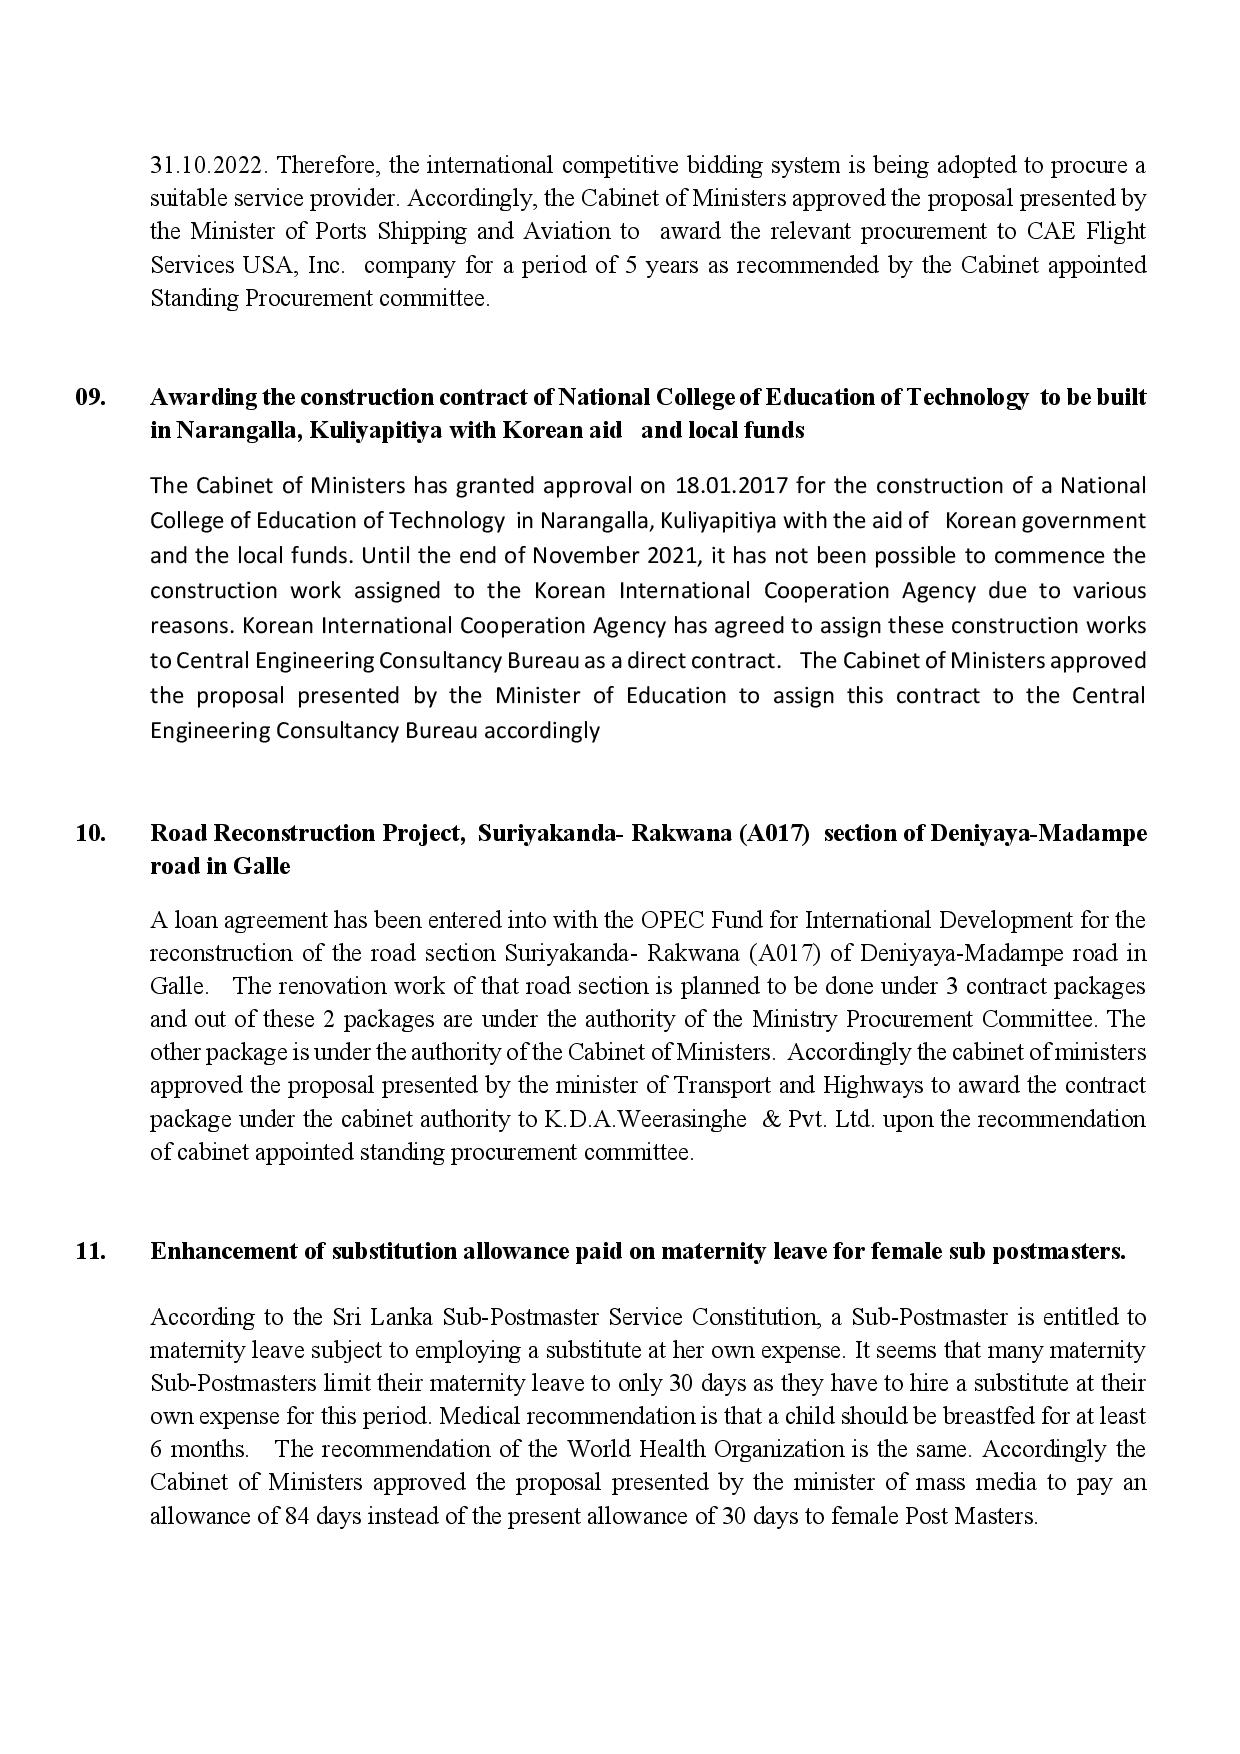 Cabinet Decision on 10.10.2022 English page 003